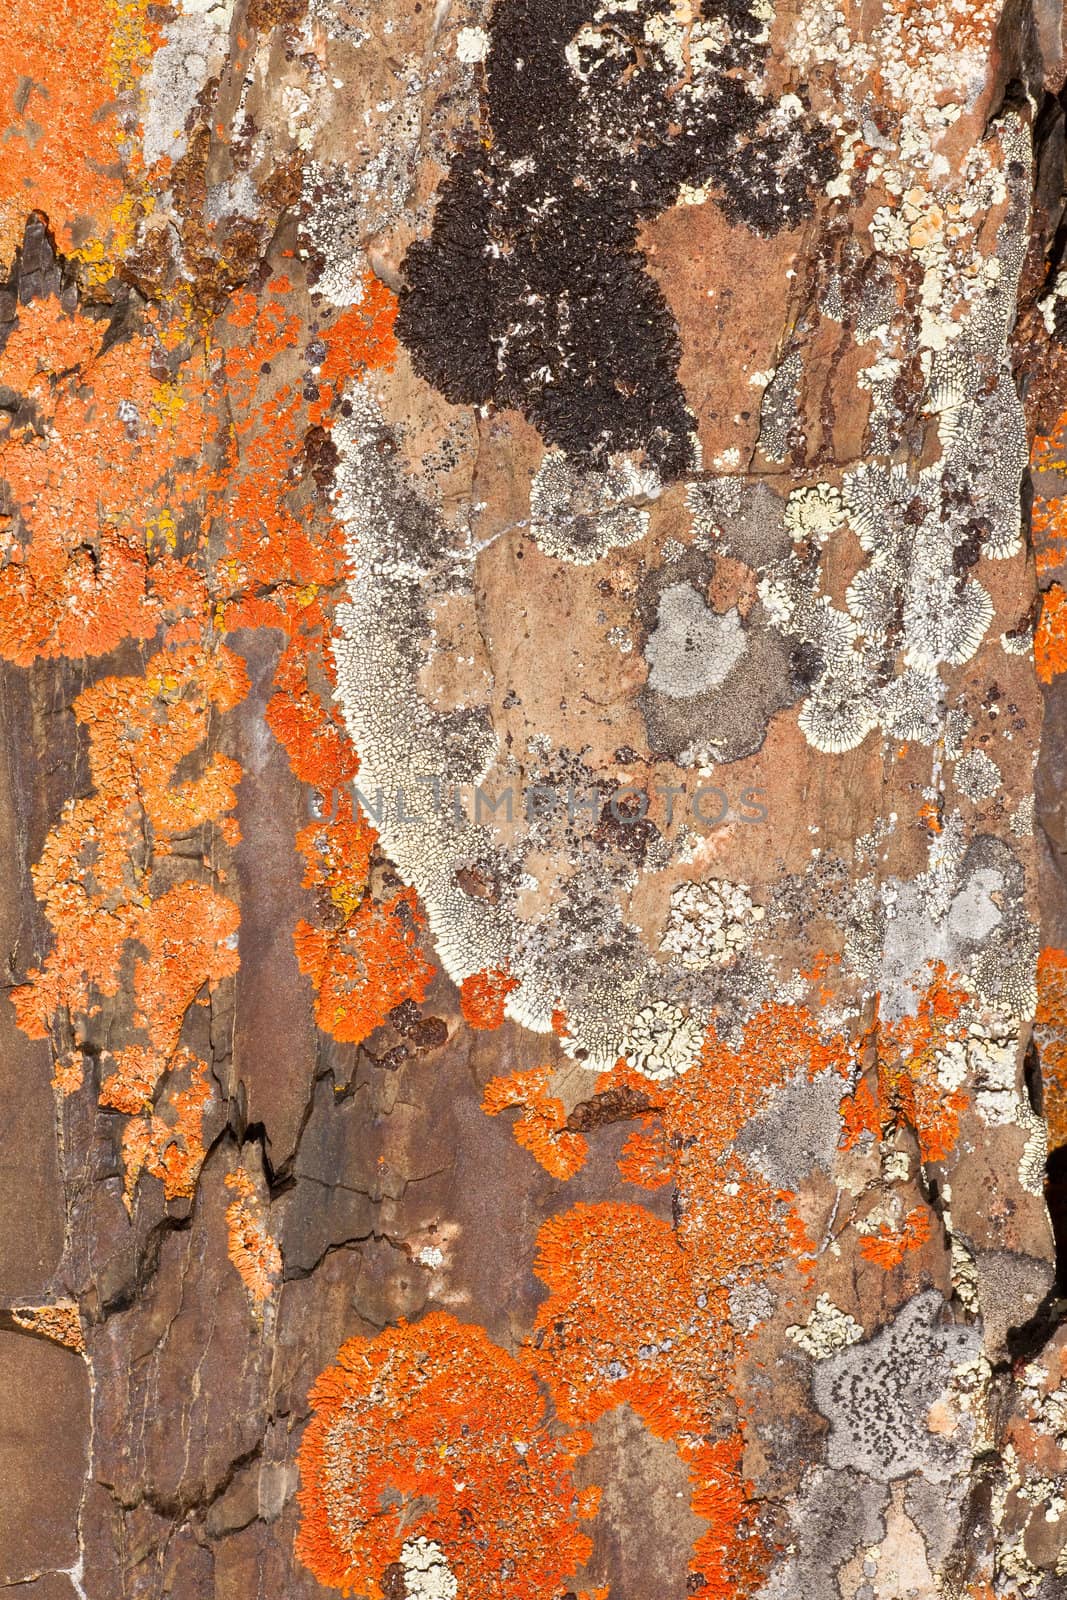 Close-up of lichen cover growing on rock surface